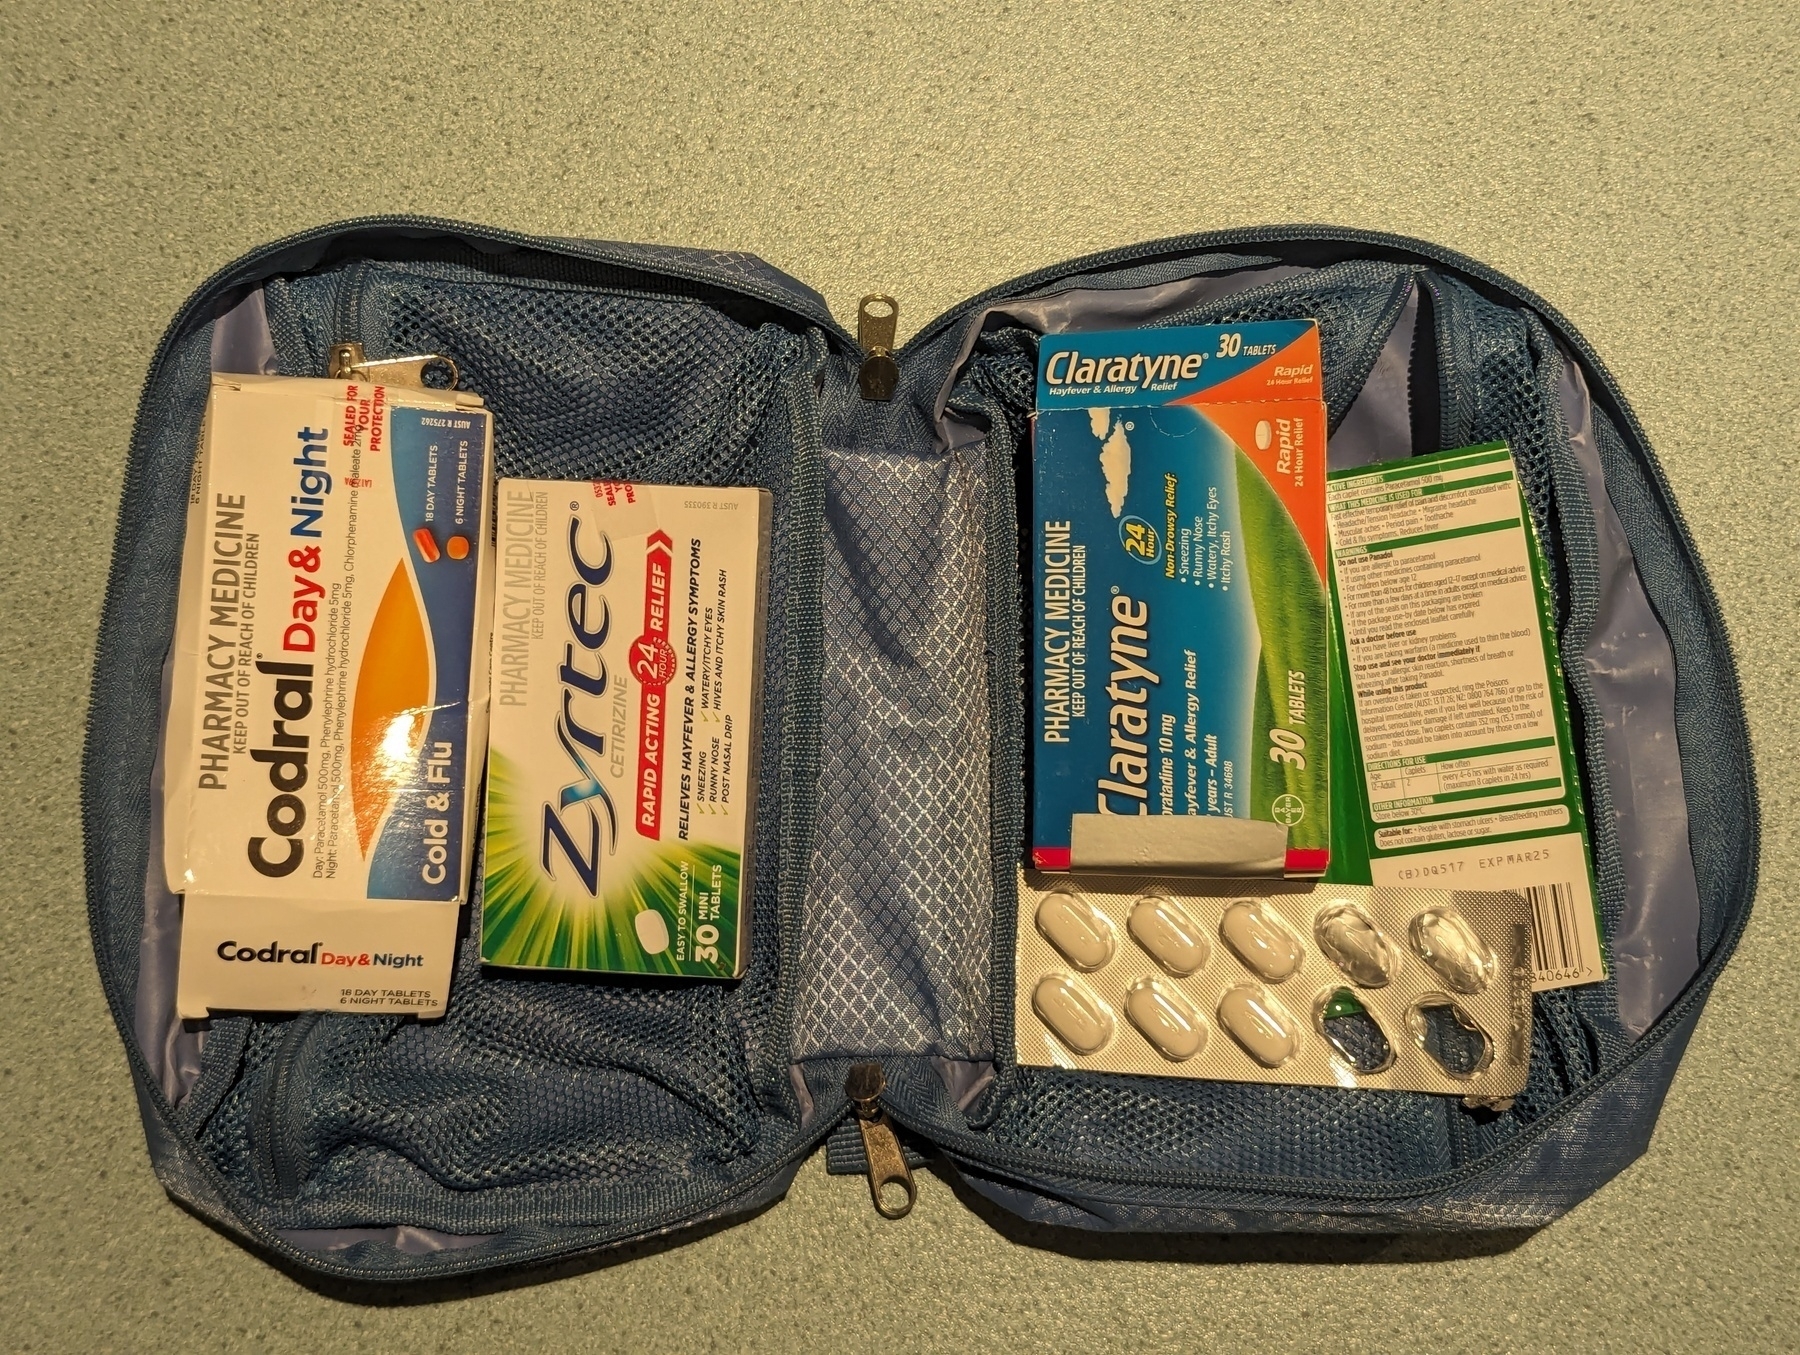 An small blue bag, opened to reveal a bunch of over the counter medication like cold and flu tablets, pain killers, etc.